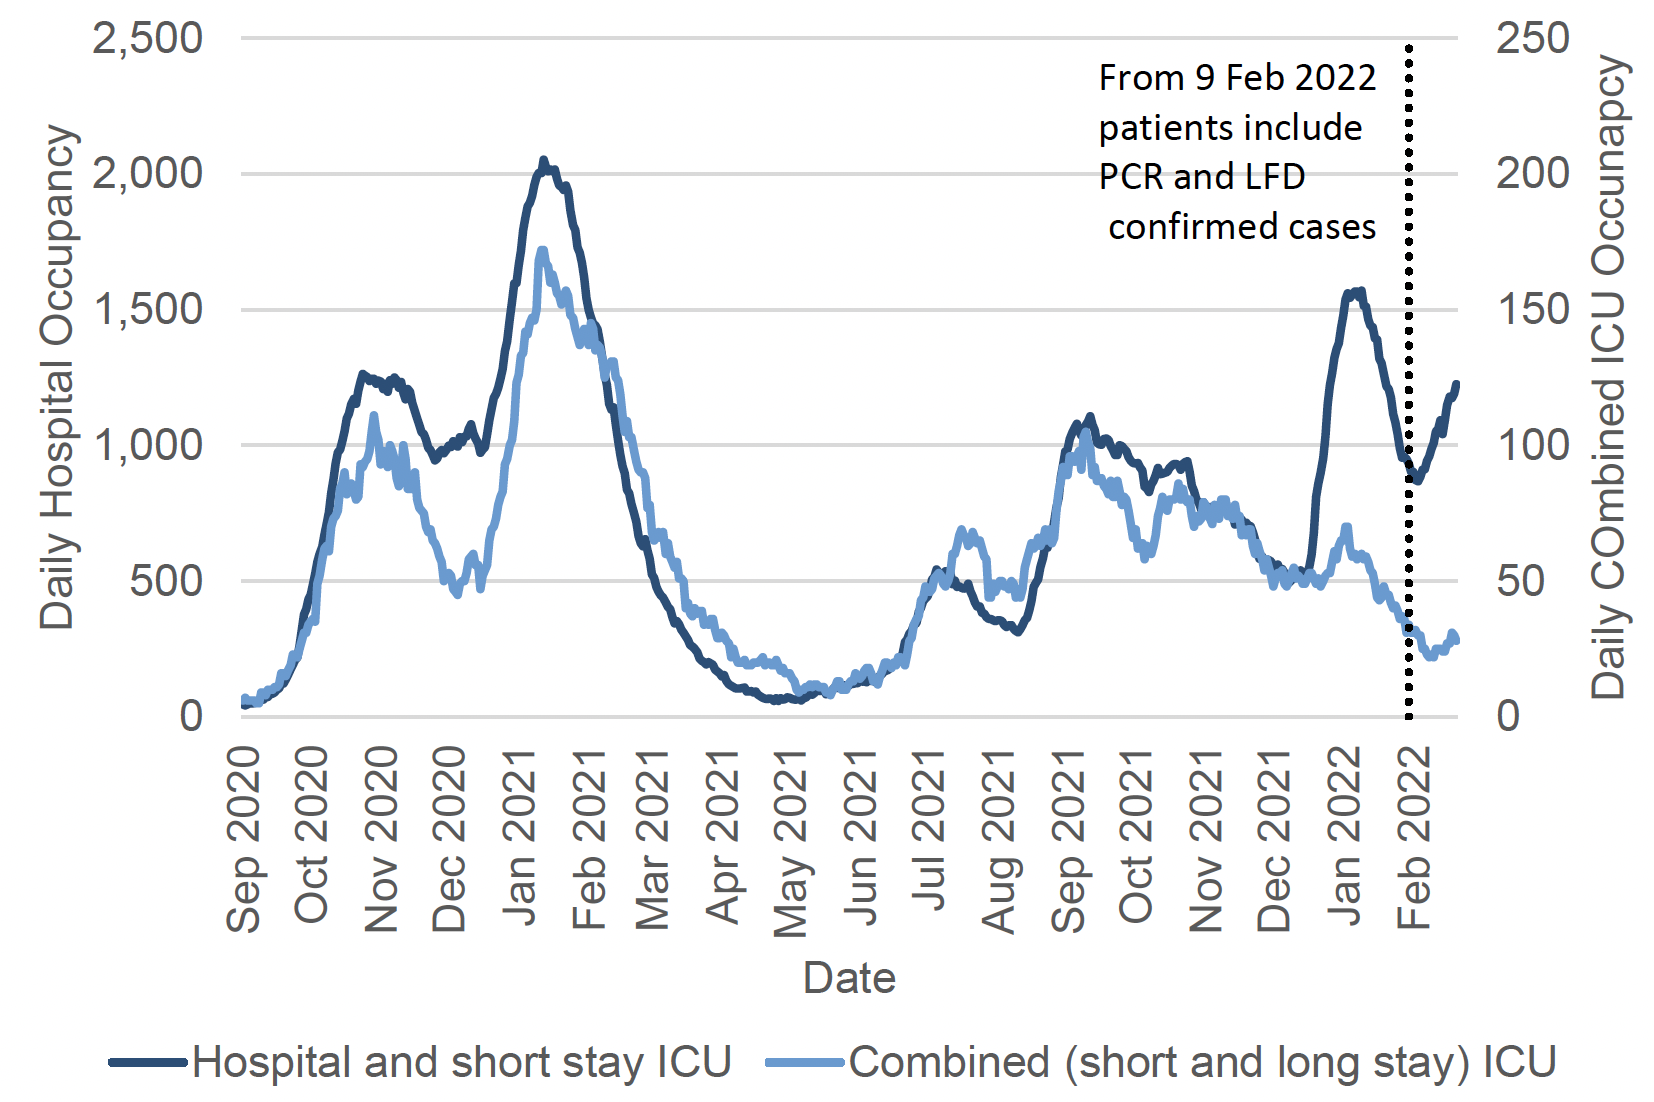 A line chart showing one line with the daily hospital occupancy (including short stay ICU) against the left axis and a line with ICU/HDU (including long and short stay) against the right axis, with recently confirmed Covid-19 since September 2020 until and including March 2022. The number of Covid-19 patients in hospital peaked in November 2020, January 2021, July 2021, September 2021, and January 2022. The number of Covid ICU patients peaked in November 2020, January 2021 and September 2021. The chart has a note that says: “from 9 February 2022 patients include PCR and LFD confirmed cases”. Before 9 February 2022, patients include only PCR confirmed cases.